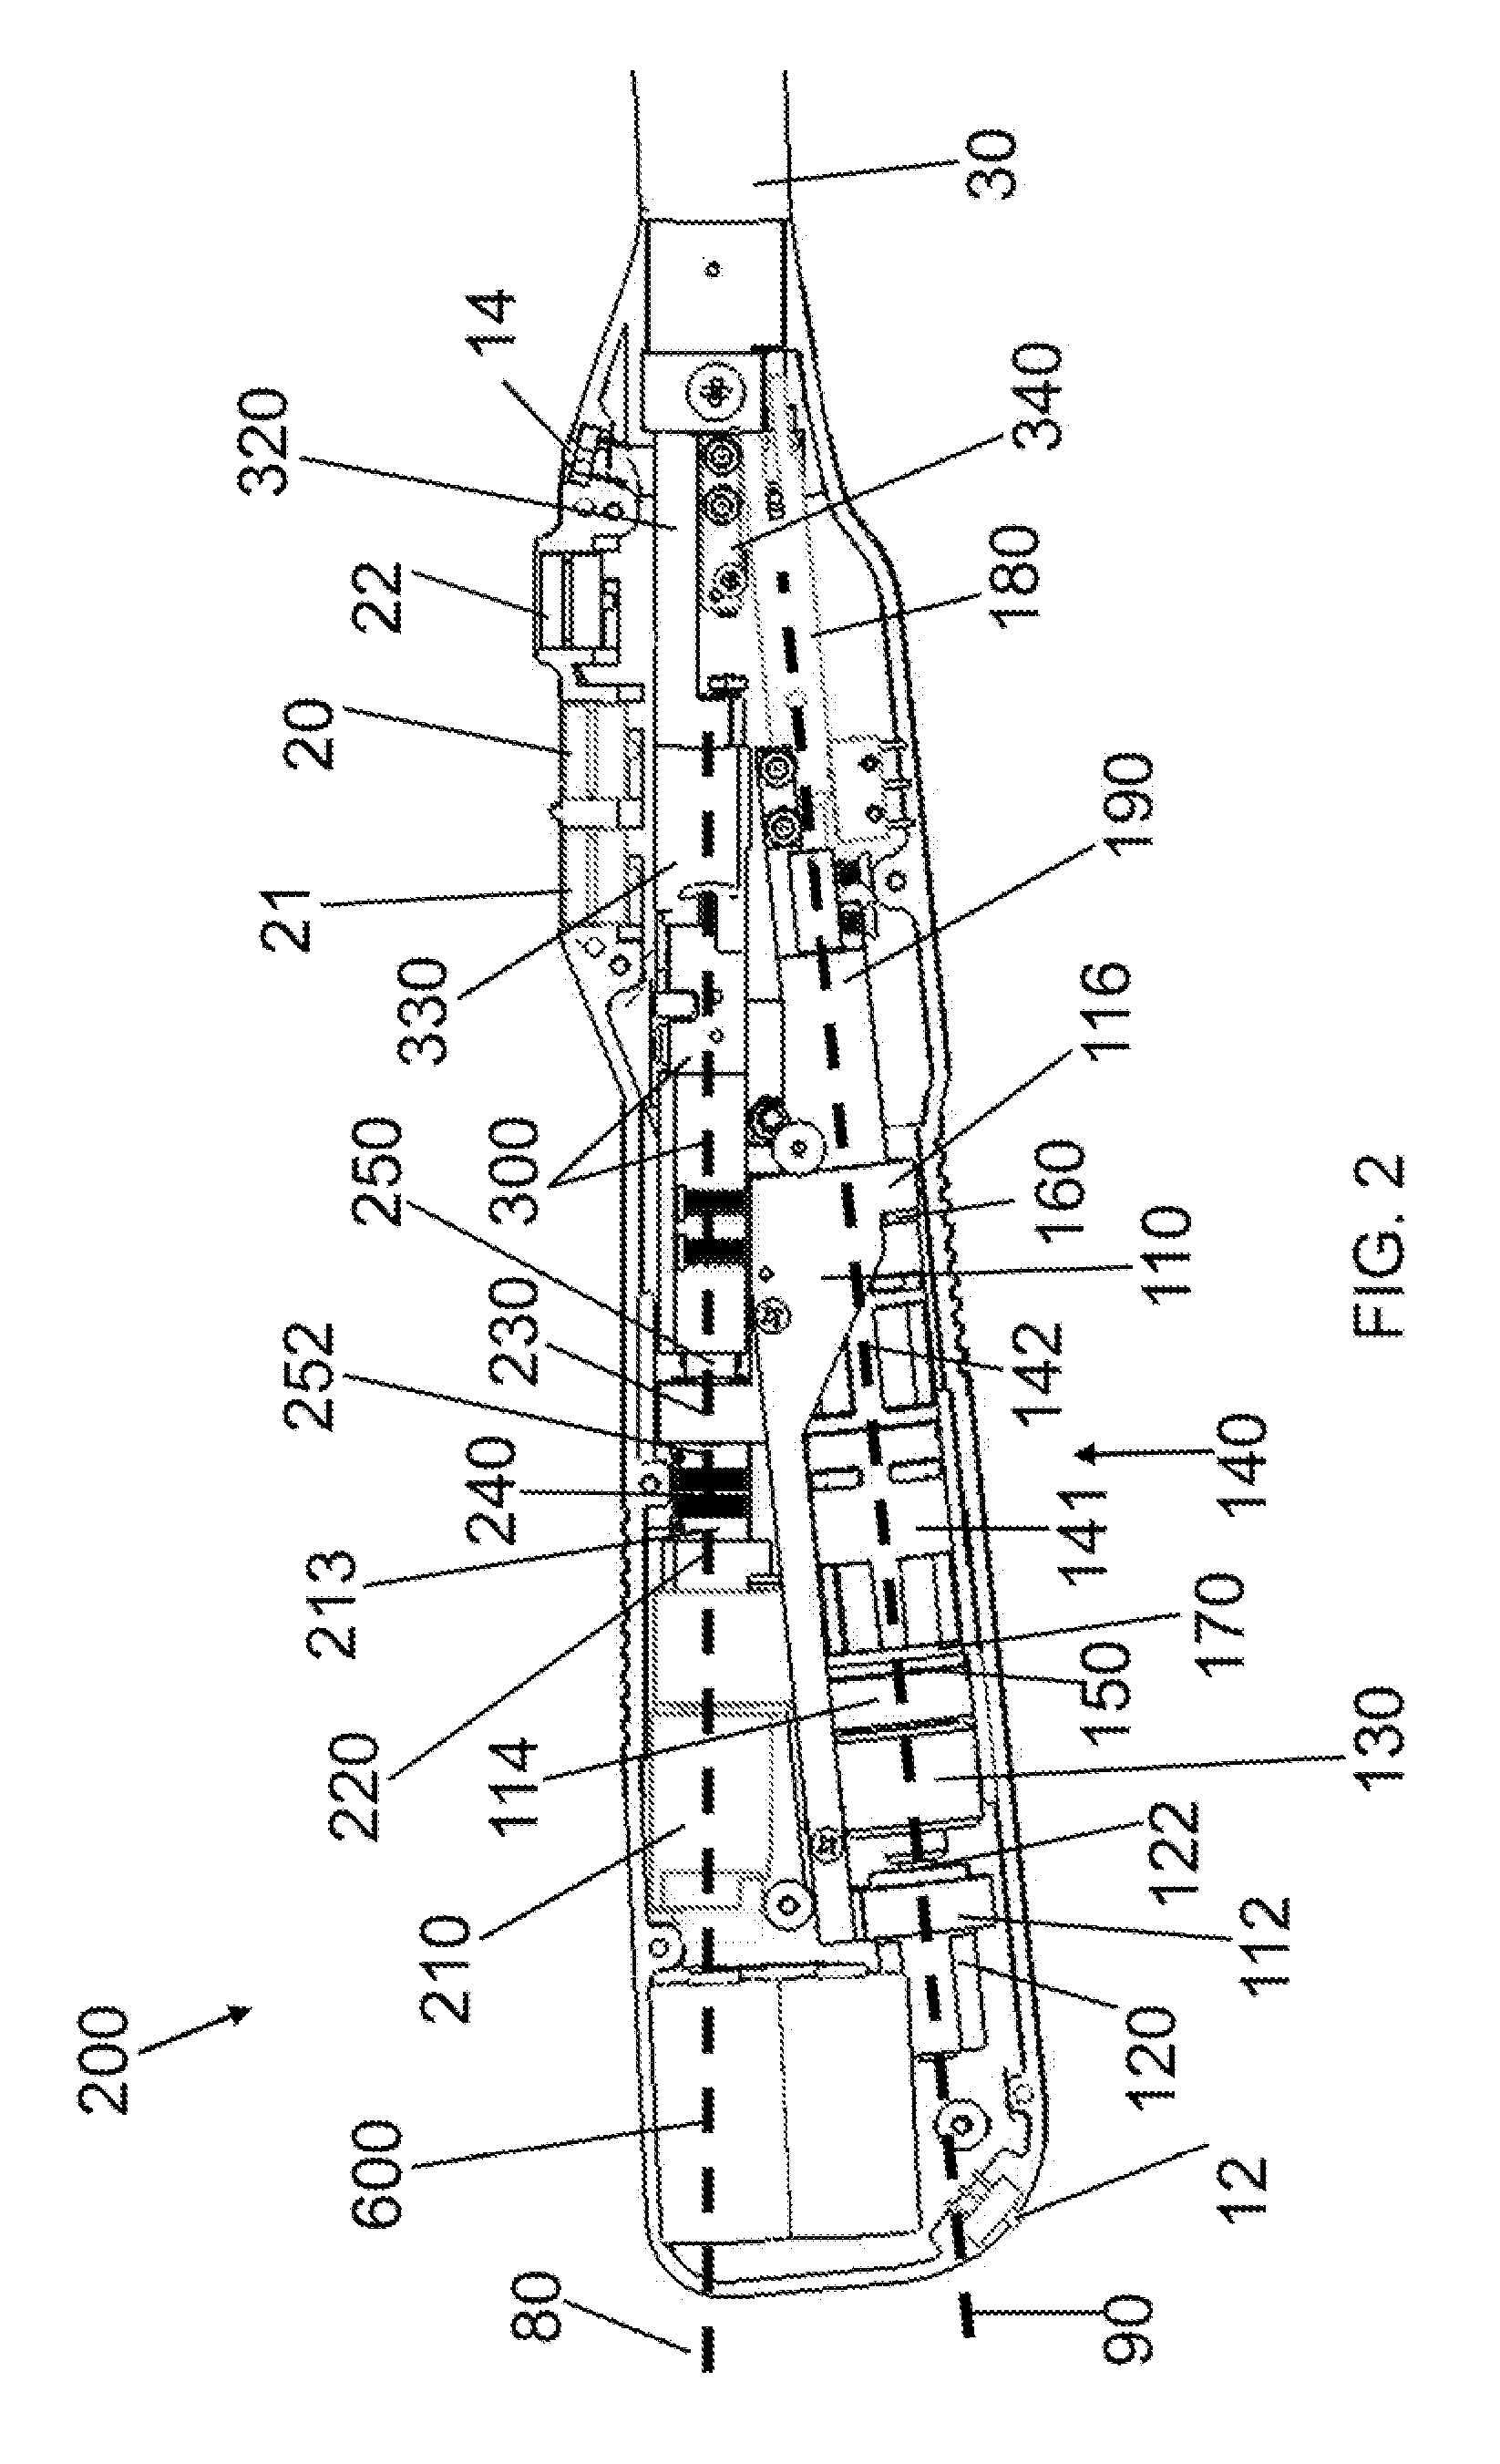 Electrically Self-Powered Surgical Instrument With Cryptographic Identification of Interchangeable Part